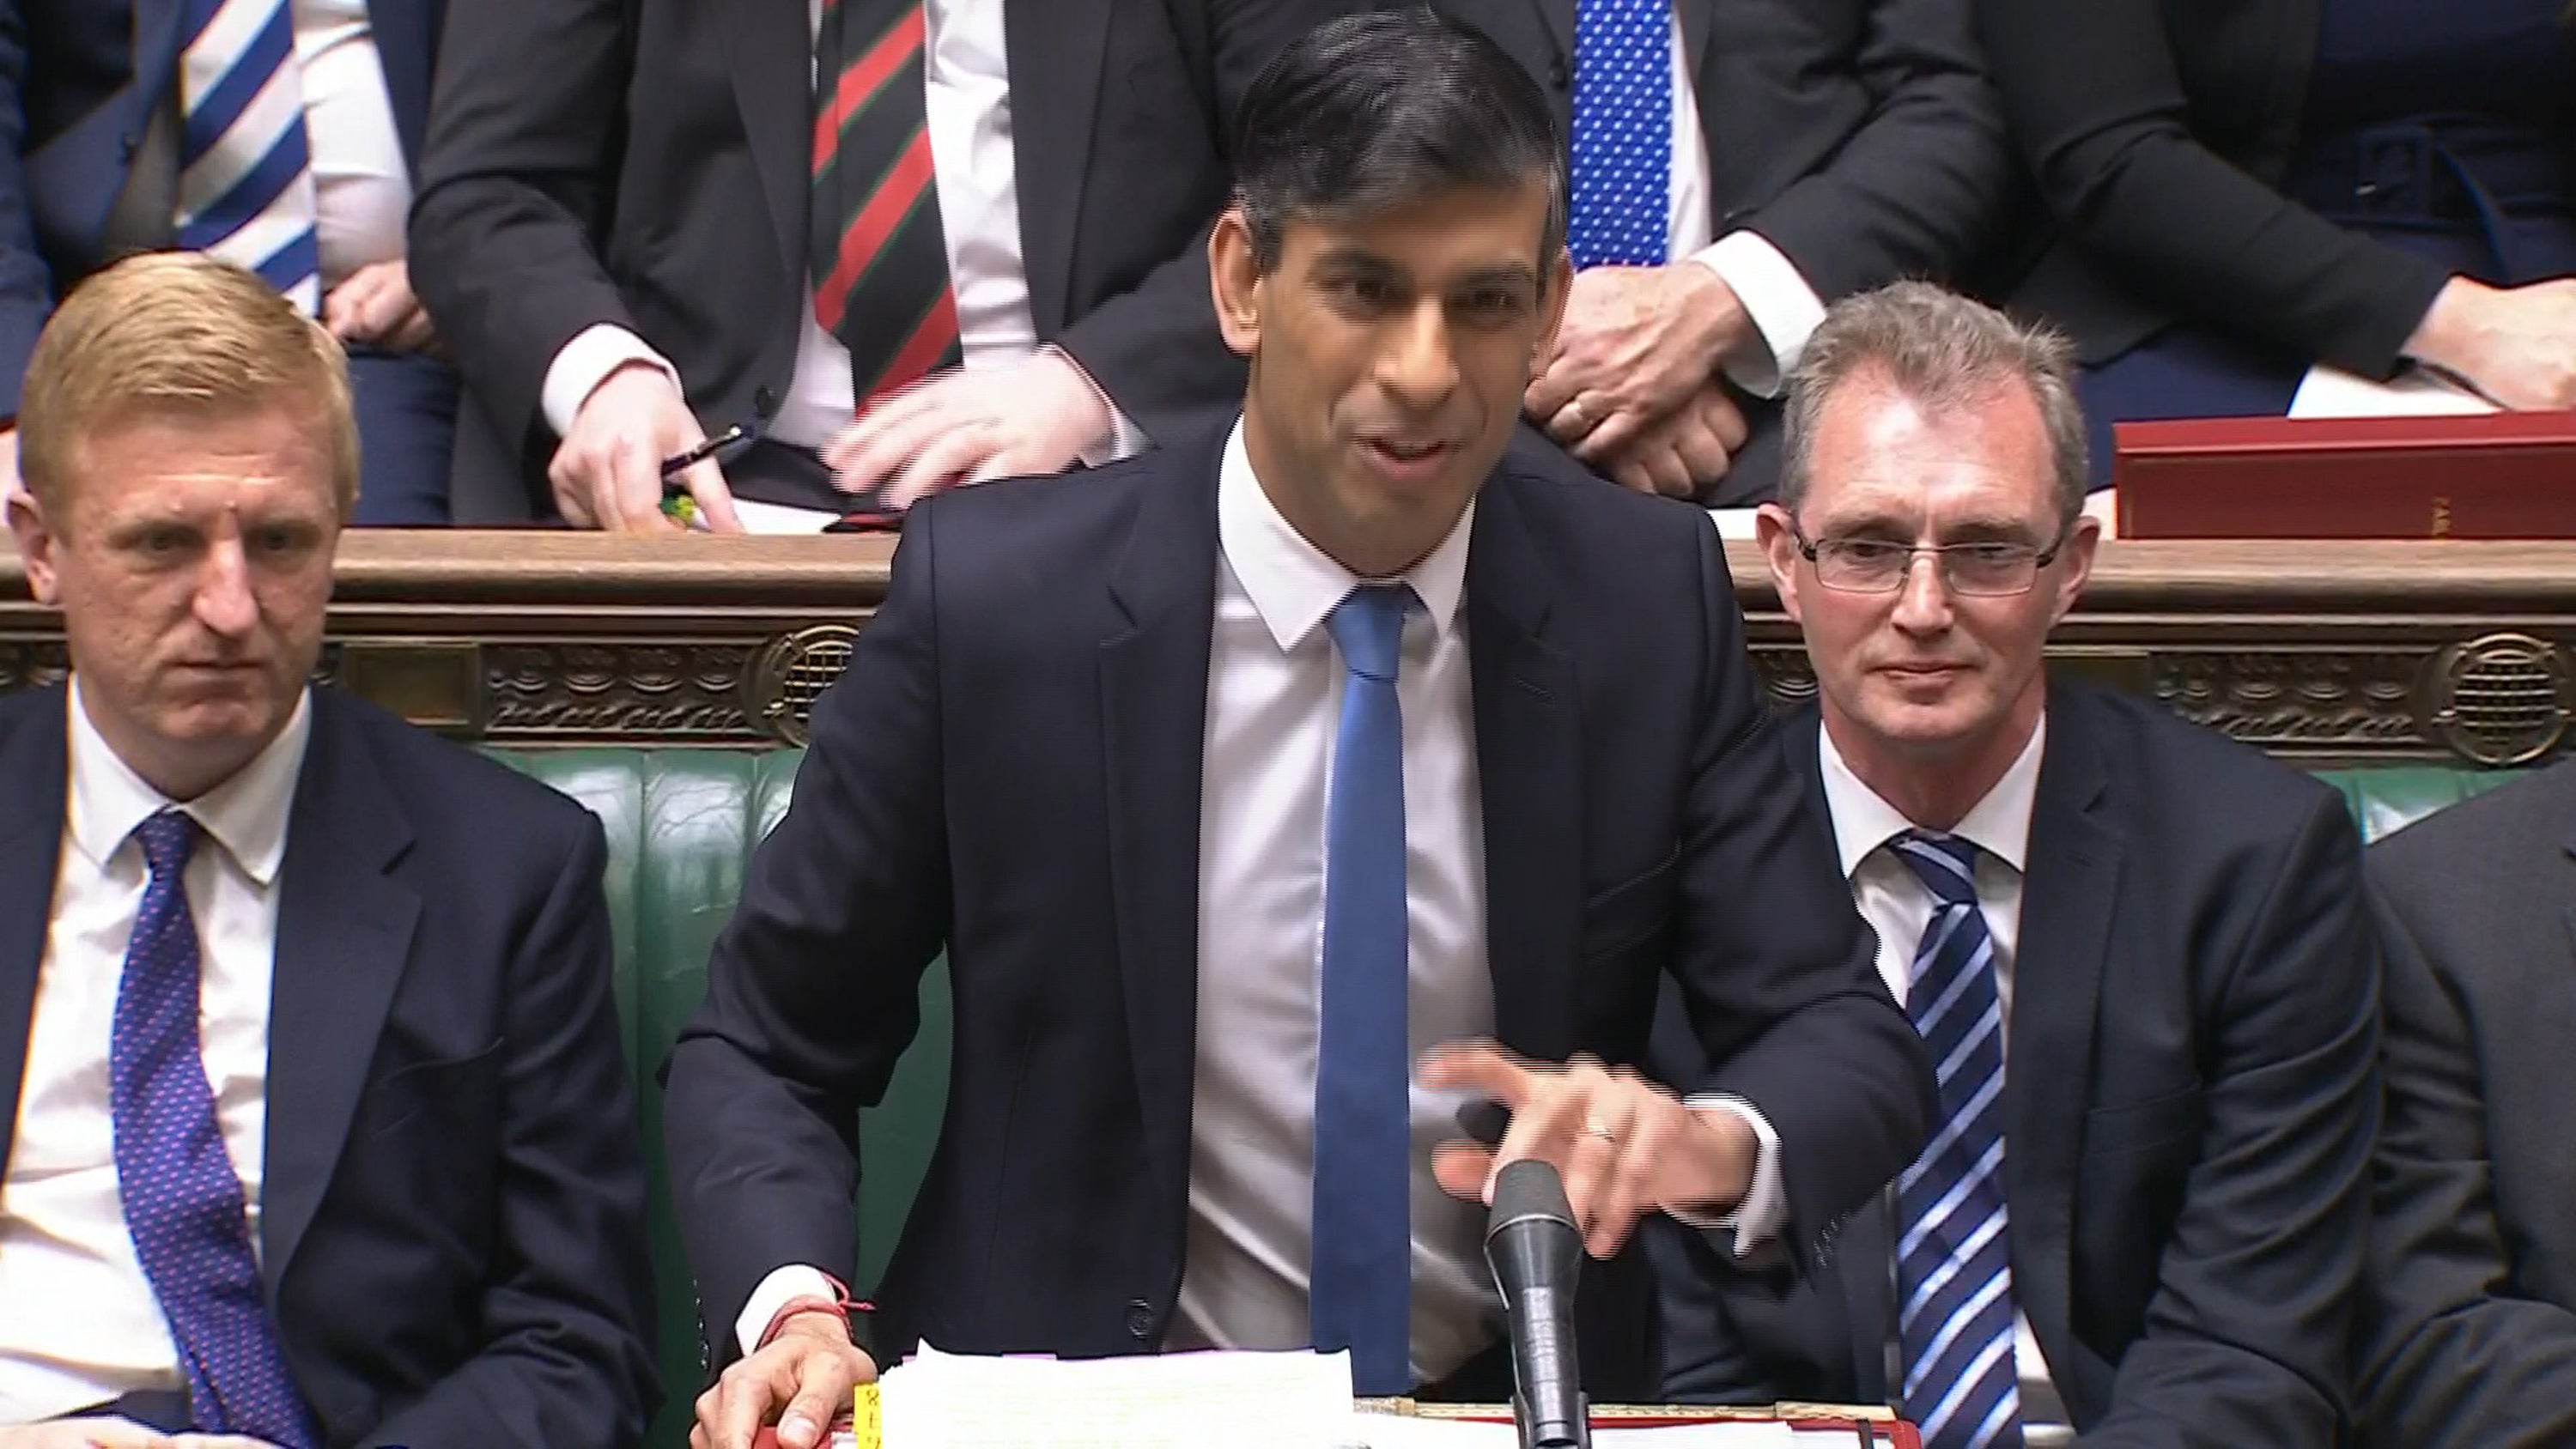 pmqs sketch: rishi sunak capsized by defecting dover mp natalie elphicke as labour celebrates election wins